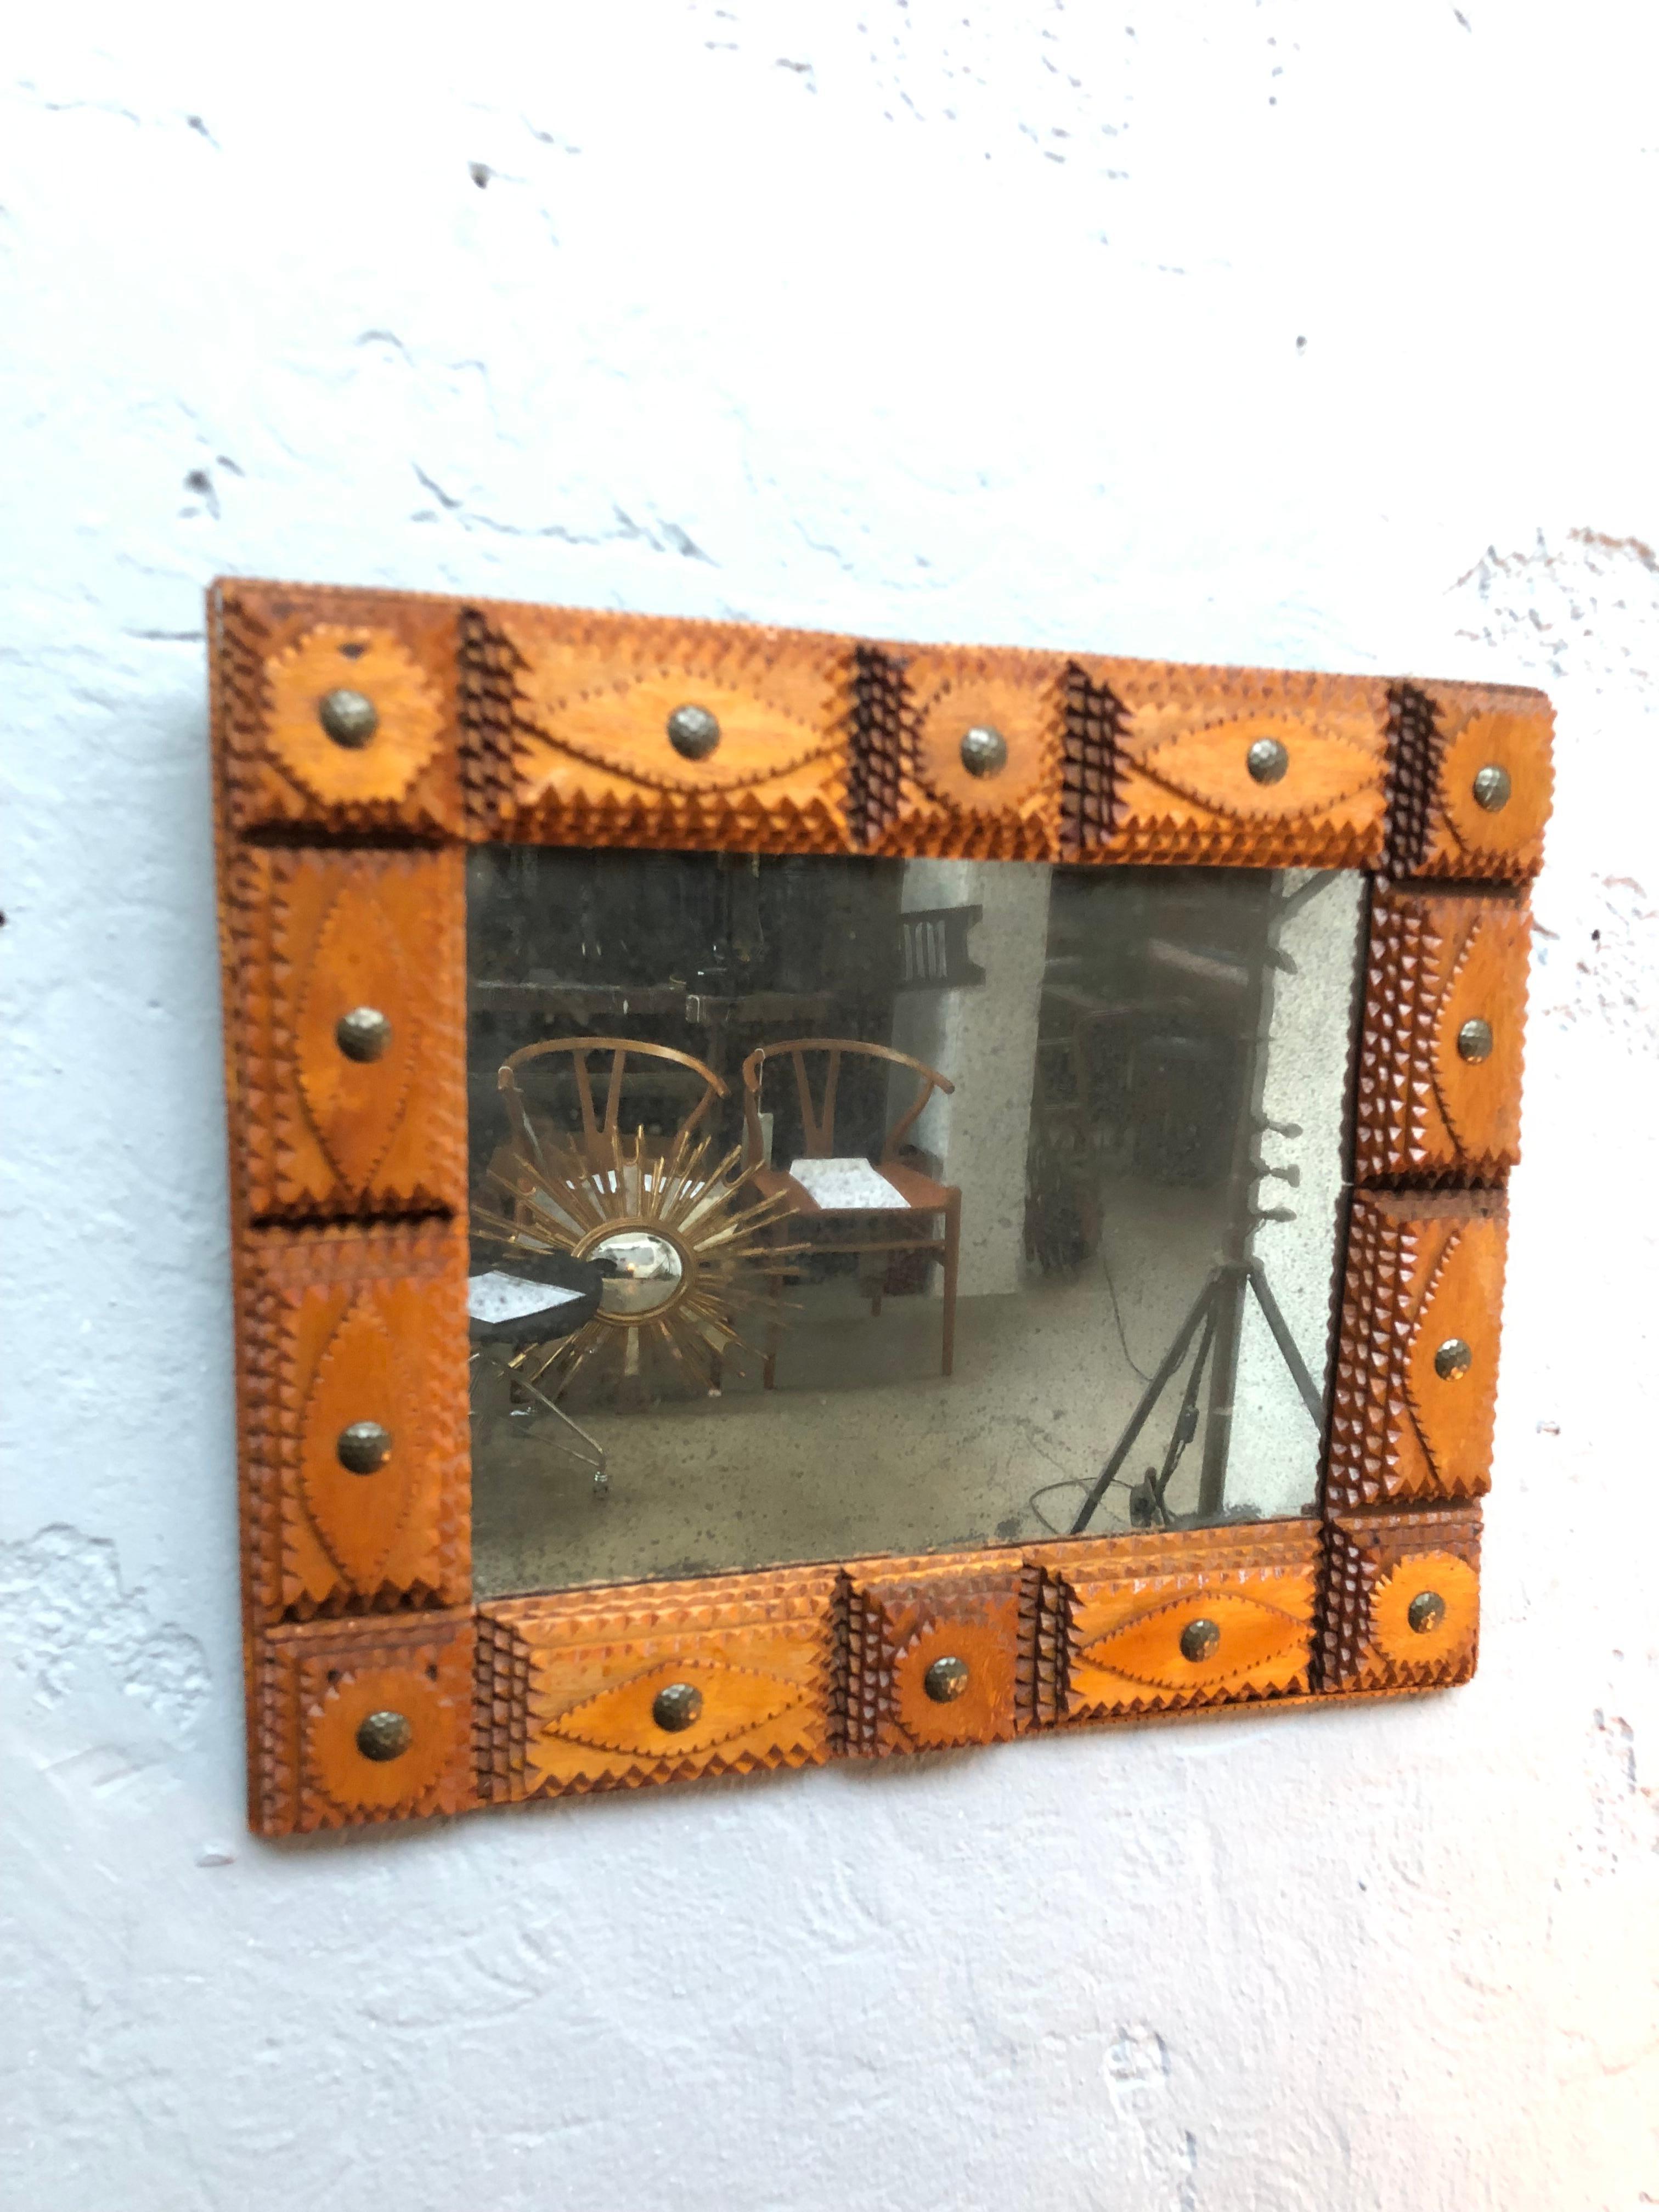 Antique tramp art wall mirror. 
Made from cigar boxes. 
With 4 layers of carved teak wood. 
Also with large brass tacks. 
A lovely patina to the glass mirror plate and also the wood and brass. 
A lovely decorative item that would grace any hallway